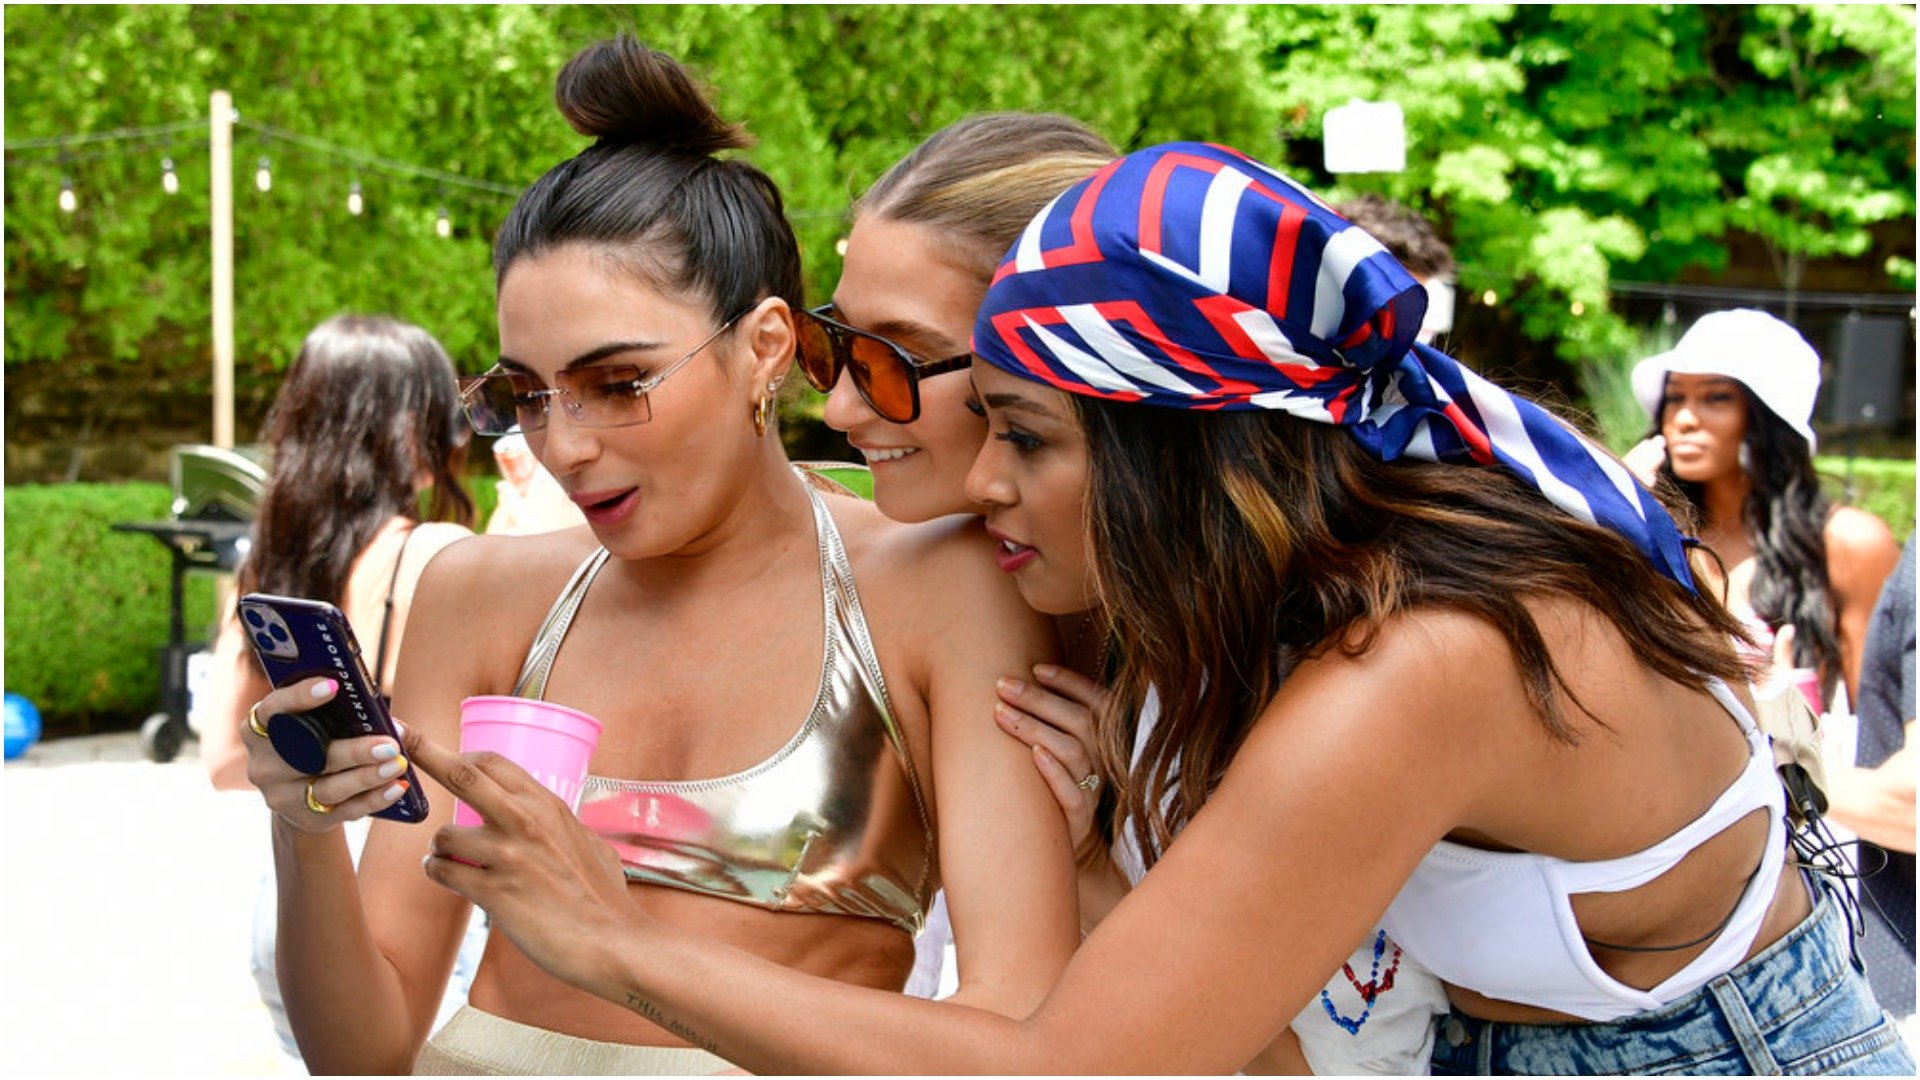 Paige DeSorbo, Amanda Batula, Mya Allen from 'Summer House' look at some hot gossip on a cell phone